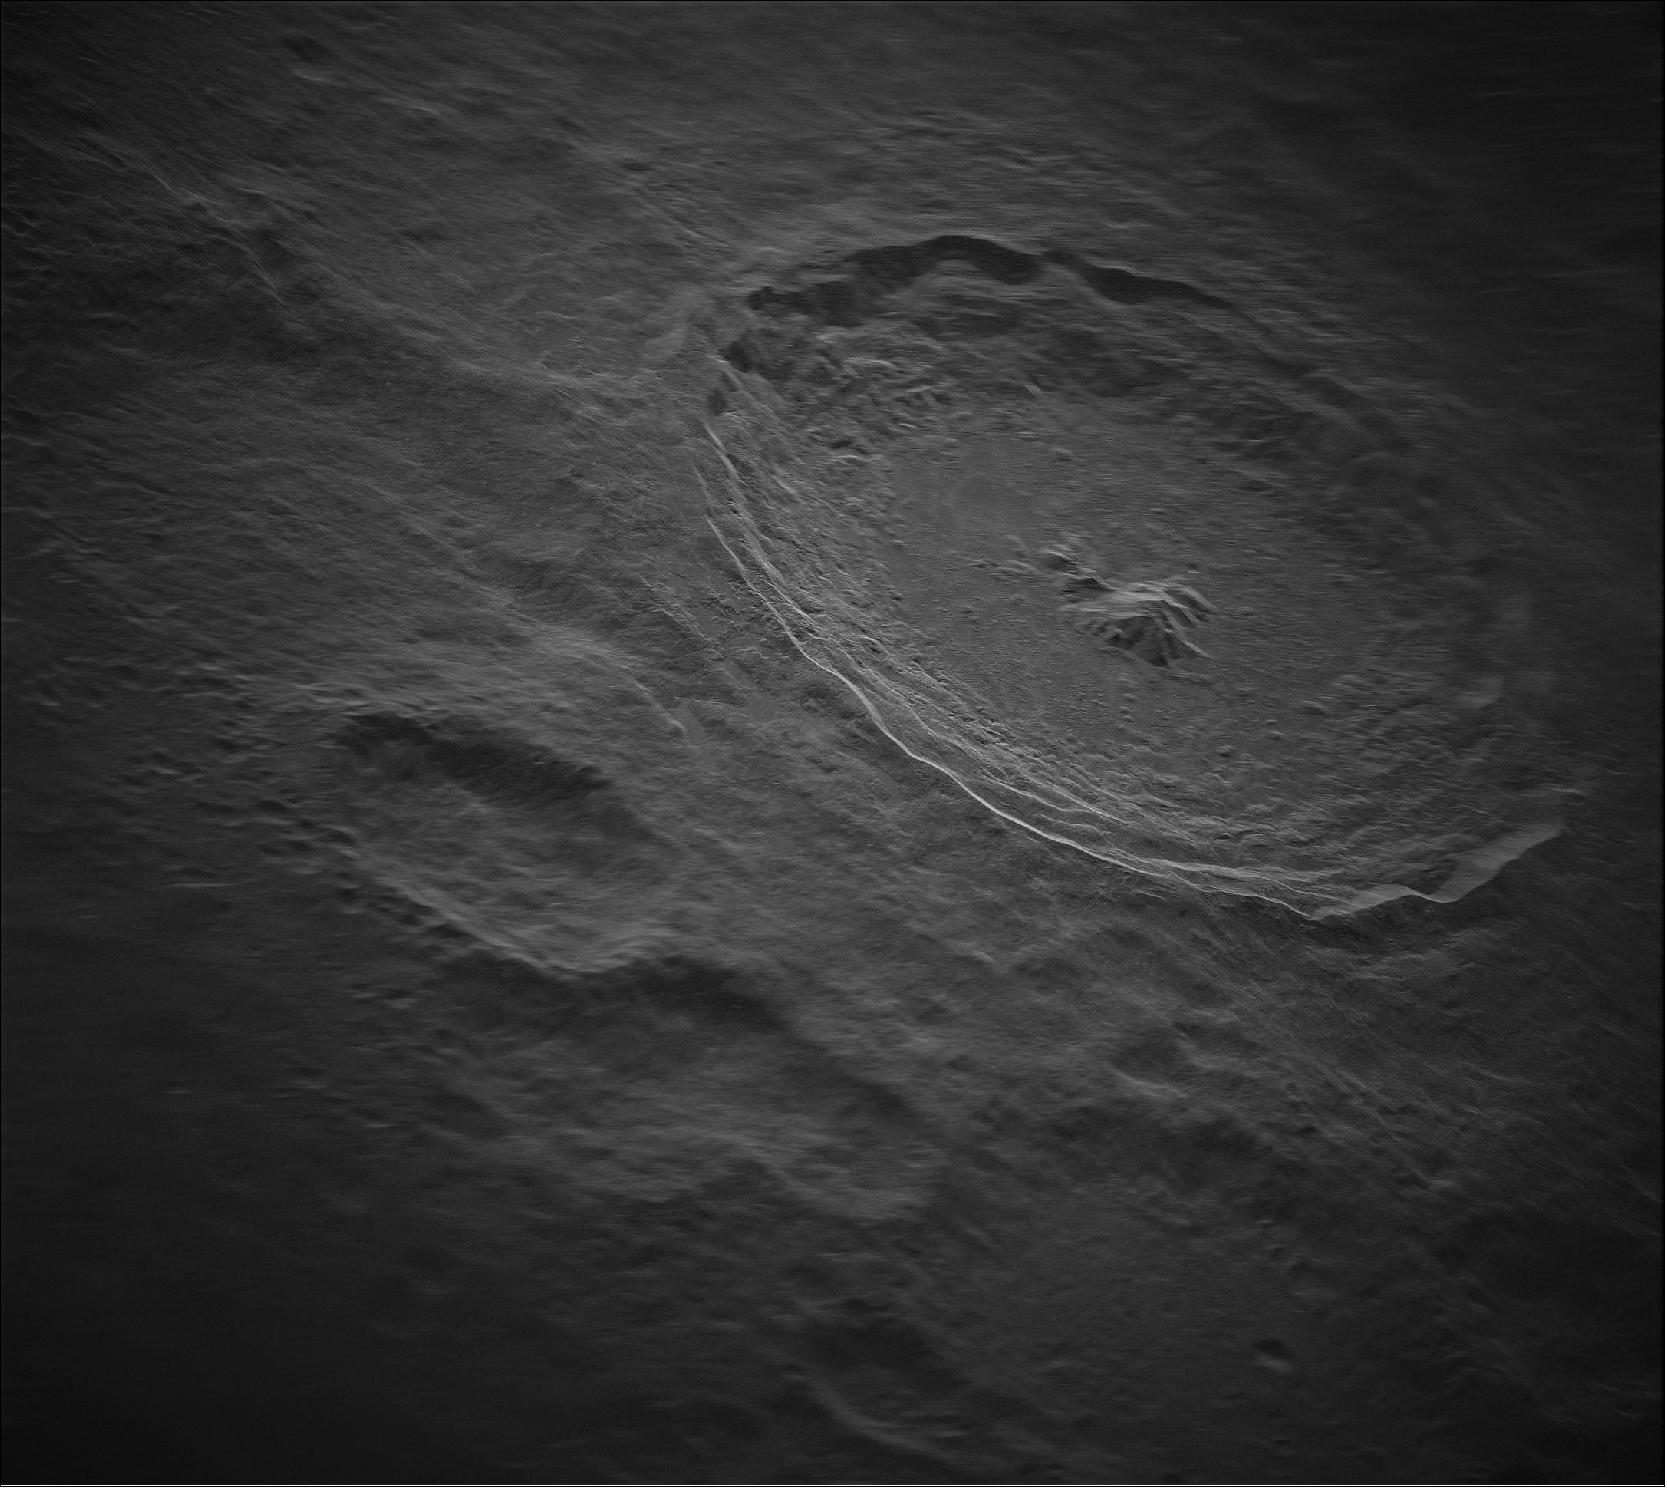 Figure 15: Partially processed view of the Tycho Crater at a resolution of nearly 5 m x 5 m and containing approximately 1.4 billion pixels, taken during a radar project by Green Bank Observatory, National Radio Astronomy Observatory, and Raytheon Intelligence & Space using the Green Bank Telescope and antennas in the VLBA (Very Long Baseline Array). This image covers an area 200 km x 175 km, which is large enough to contain the 86 km-diameter Tycho Crater on the Moon (image credit: NRAO/GBO/Raytheon/NSF/AUI)